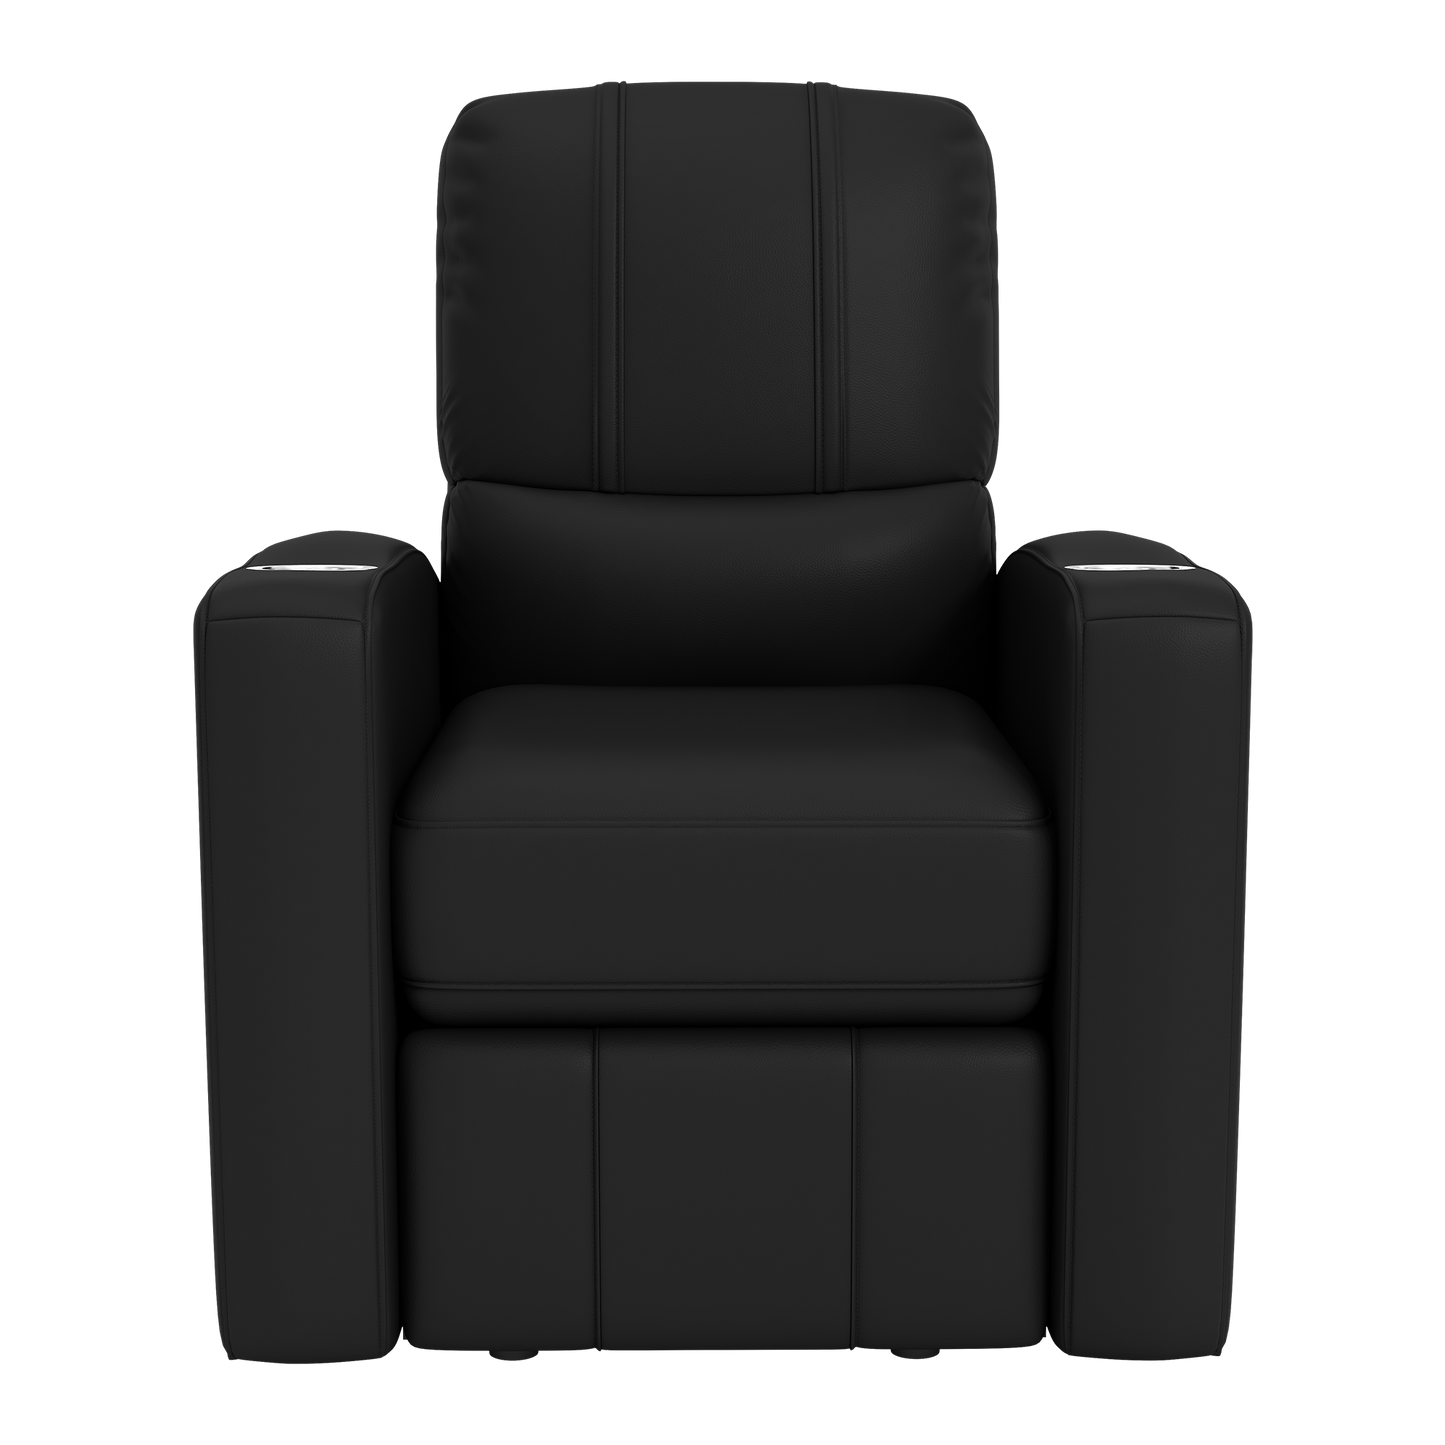 Stealth Recliner with Charlotte FC Primary Logo